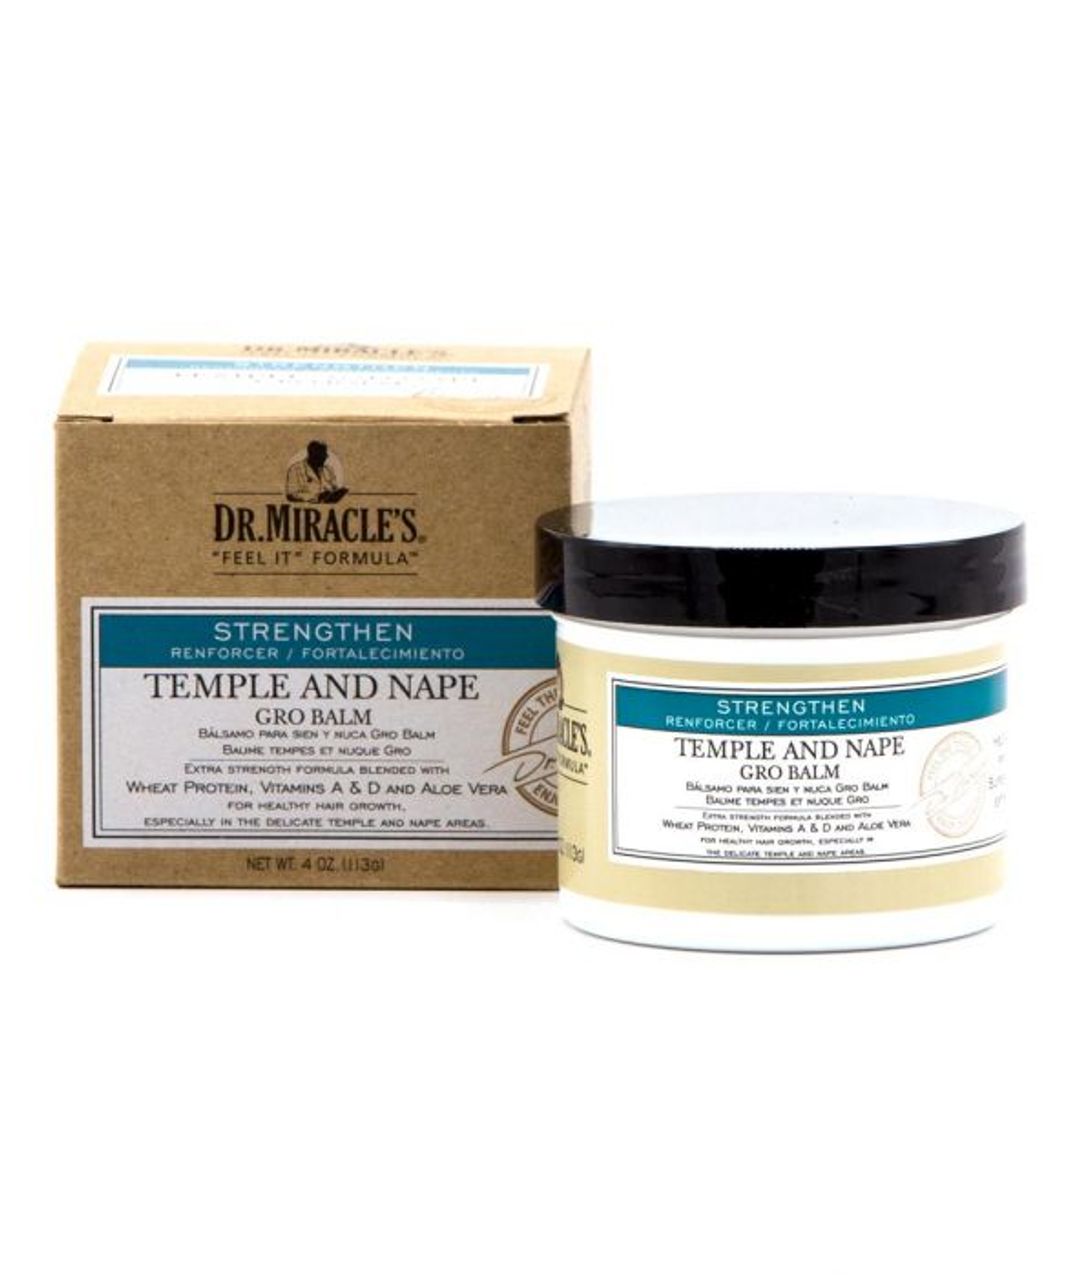 Dr. Miracle's Temple And Nape Gro Balm 4oz - Regular